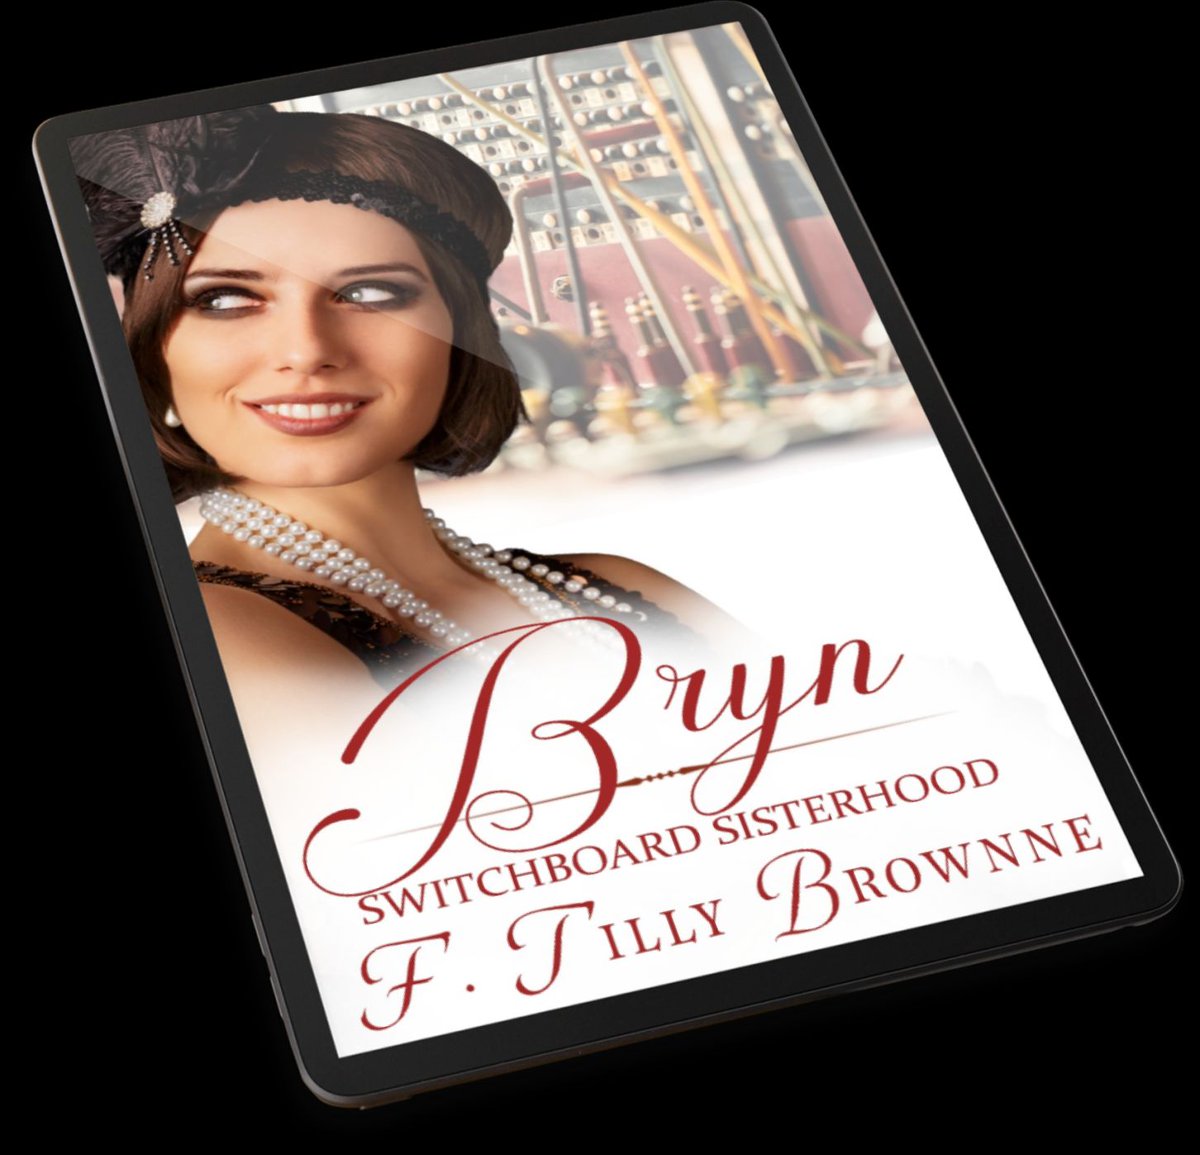 RELEASED! Order now! Bryn, sequel to Nora in Switchboard Sisterhood. Nora insists on matchmaking her with her brother. Bryn will have none of that! Released 9/26/23 #Kindle buff.ly/3OyYrIJ #HistoricalRomance #IARTG